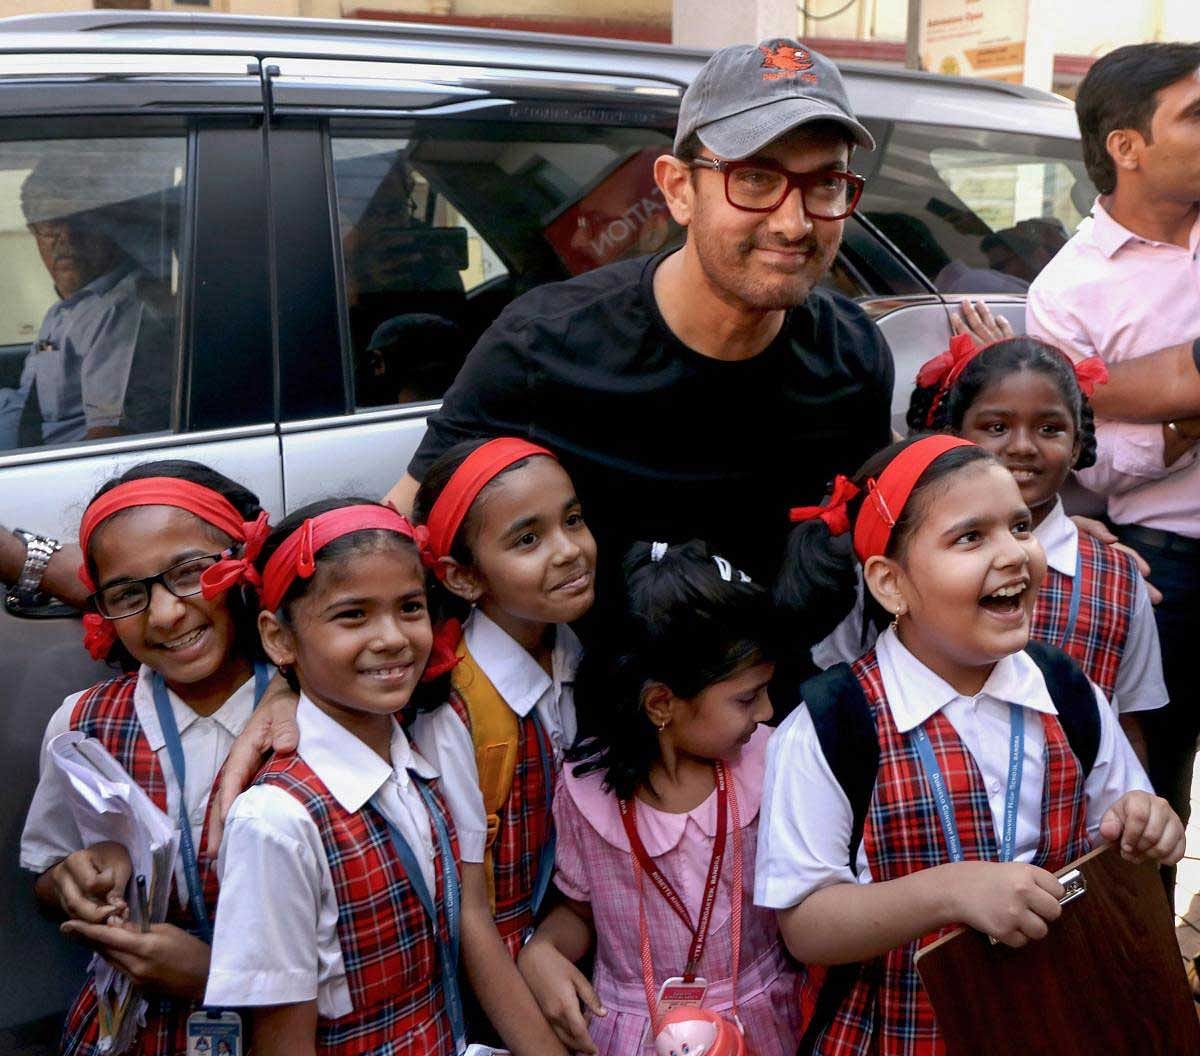 Bollywood actor Aamir Khan poses with children, in Mumbai, Wednesday, March 27, 2019. (PTI Photo)